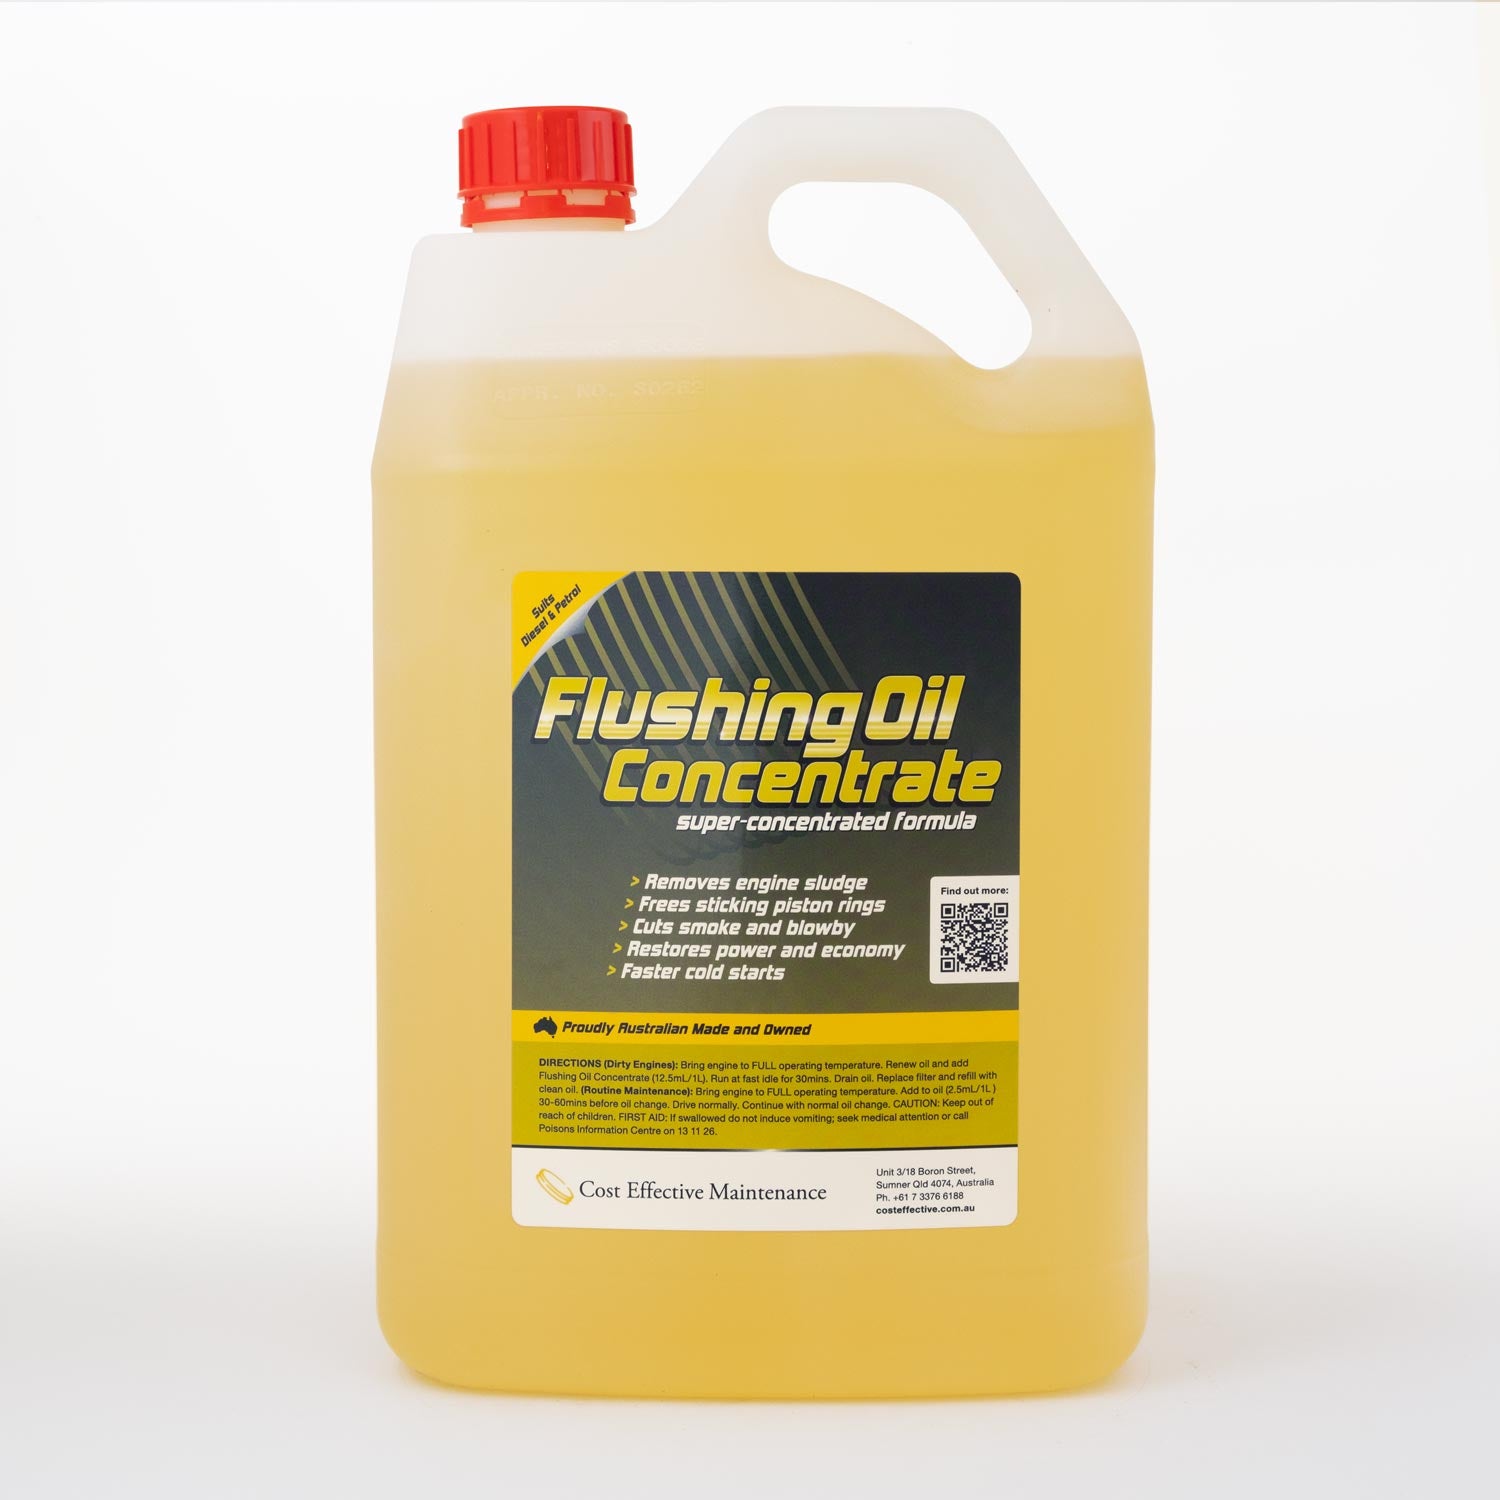 Cost Effective Maintenance Flushing Oil Concentrate for Diesel and Petrol Engines